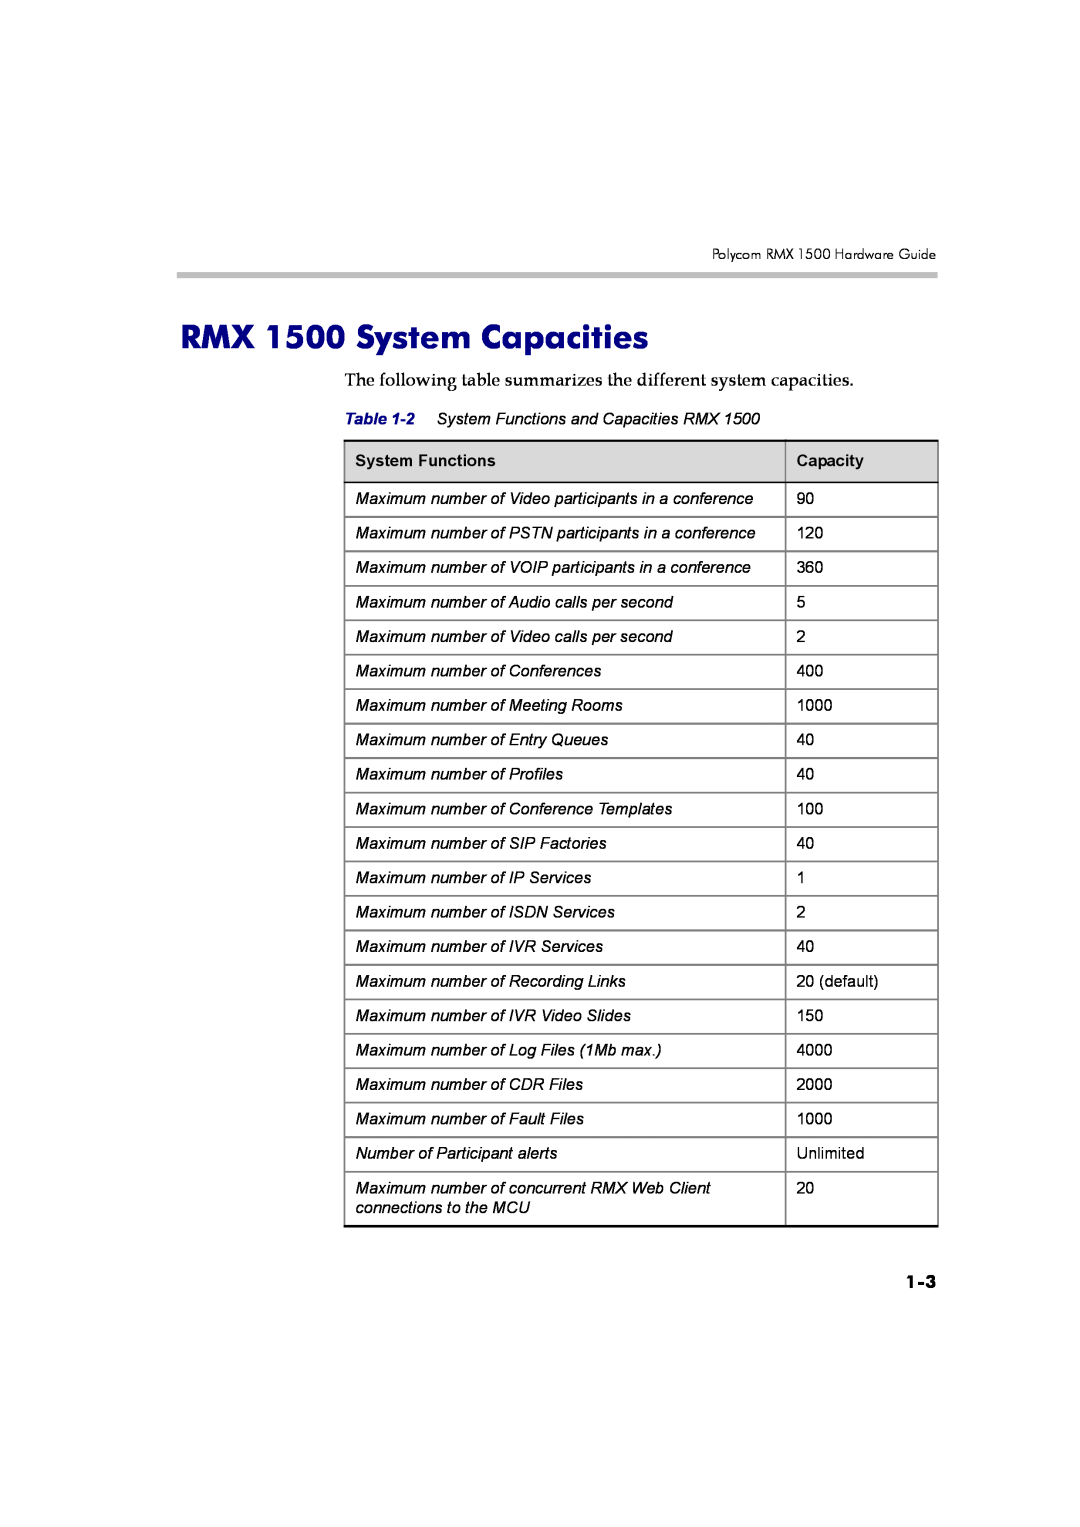 Polycom DOC2557A RMX 1500 System Capacities, The following table summarizes the different system capacities, Capacity 